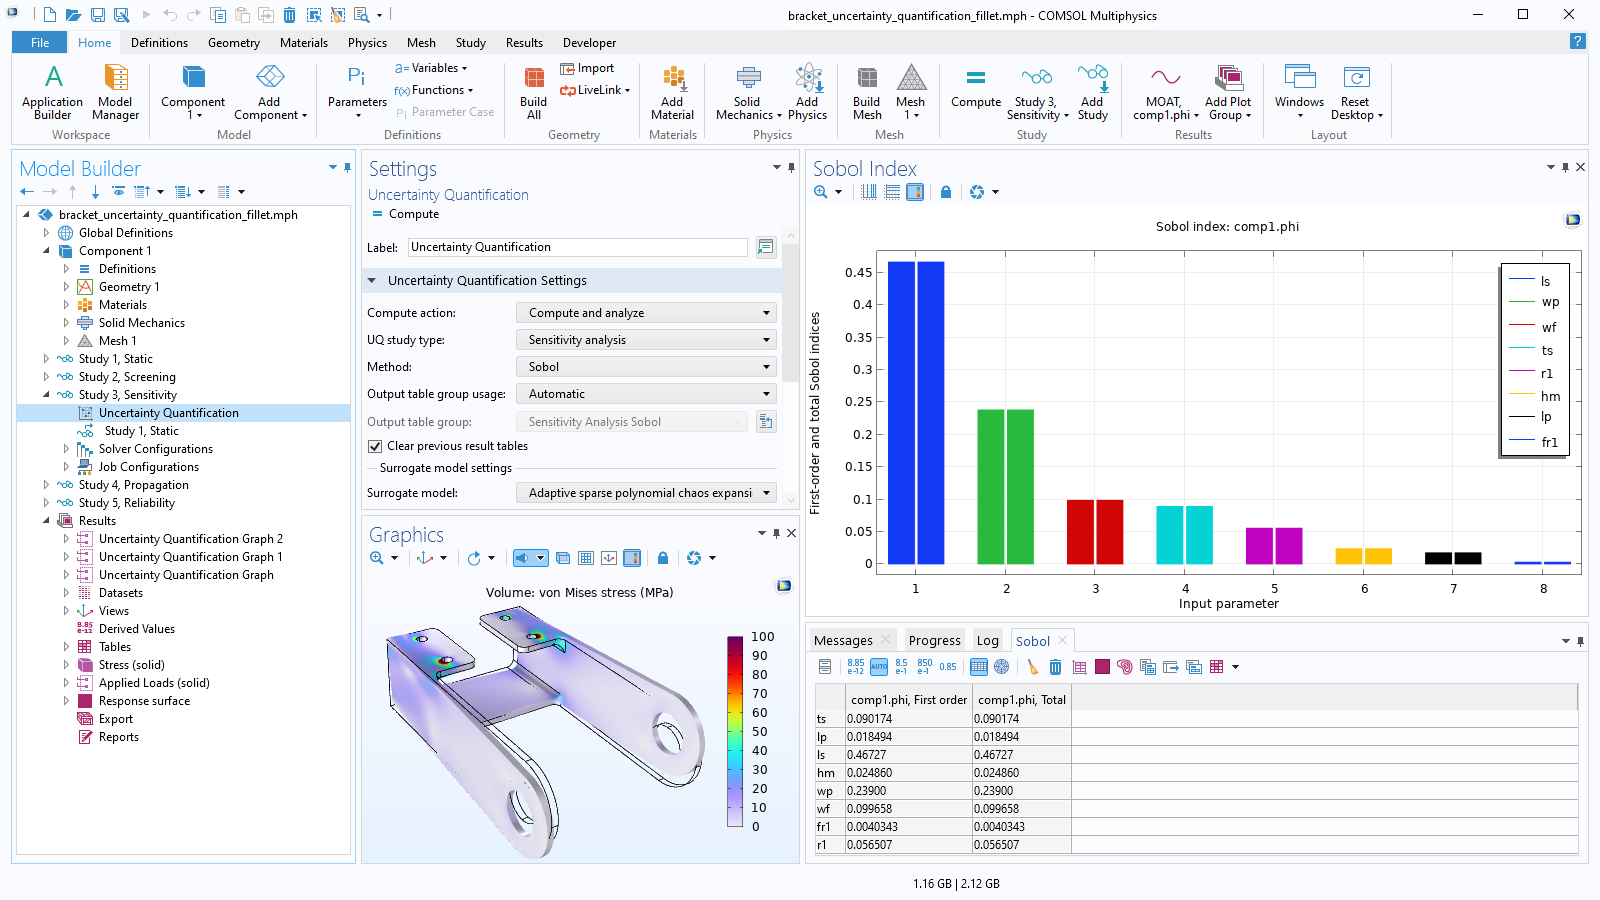 The COMSOL Multiphysics UI showing the Model Builder with the Uncertainty Quantification node highlighted, the corresponding Settings window, a bracket model with stress shown, and a Sobol index to the right.